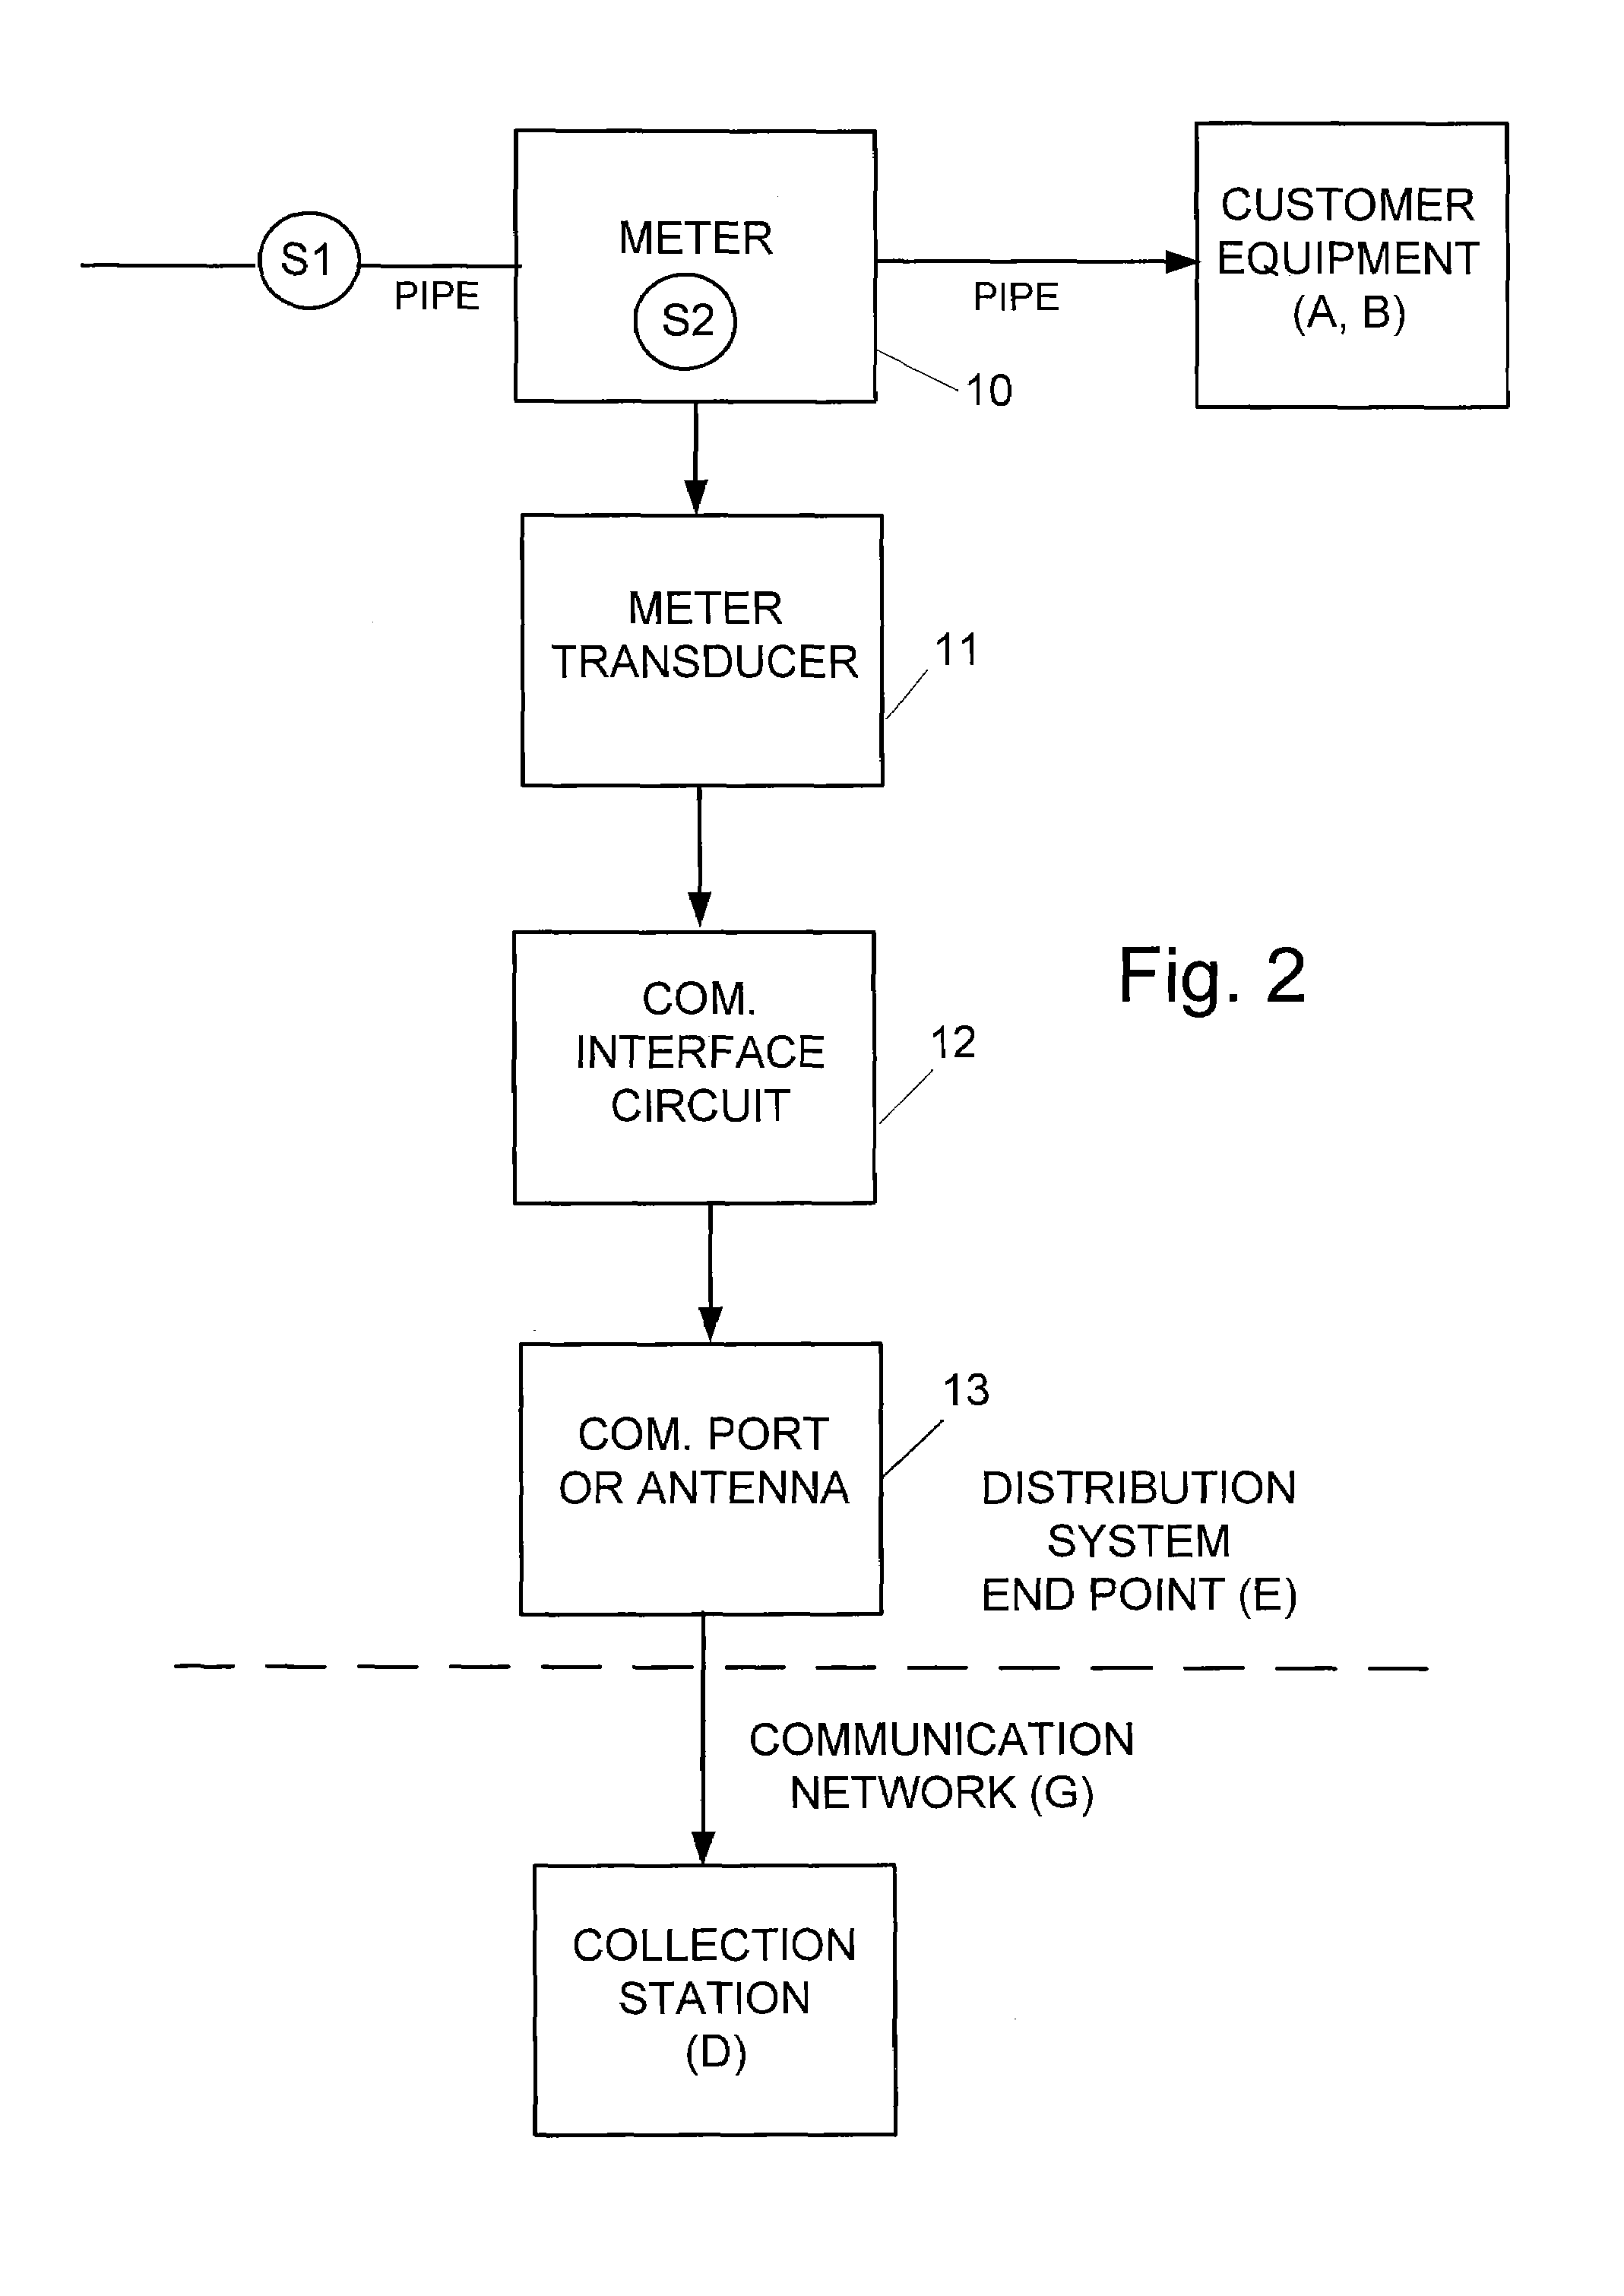 Apparatus and Method for Measuring Water Quality in a Water Distribution System